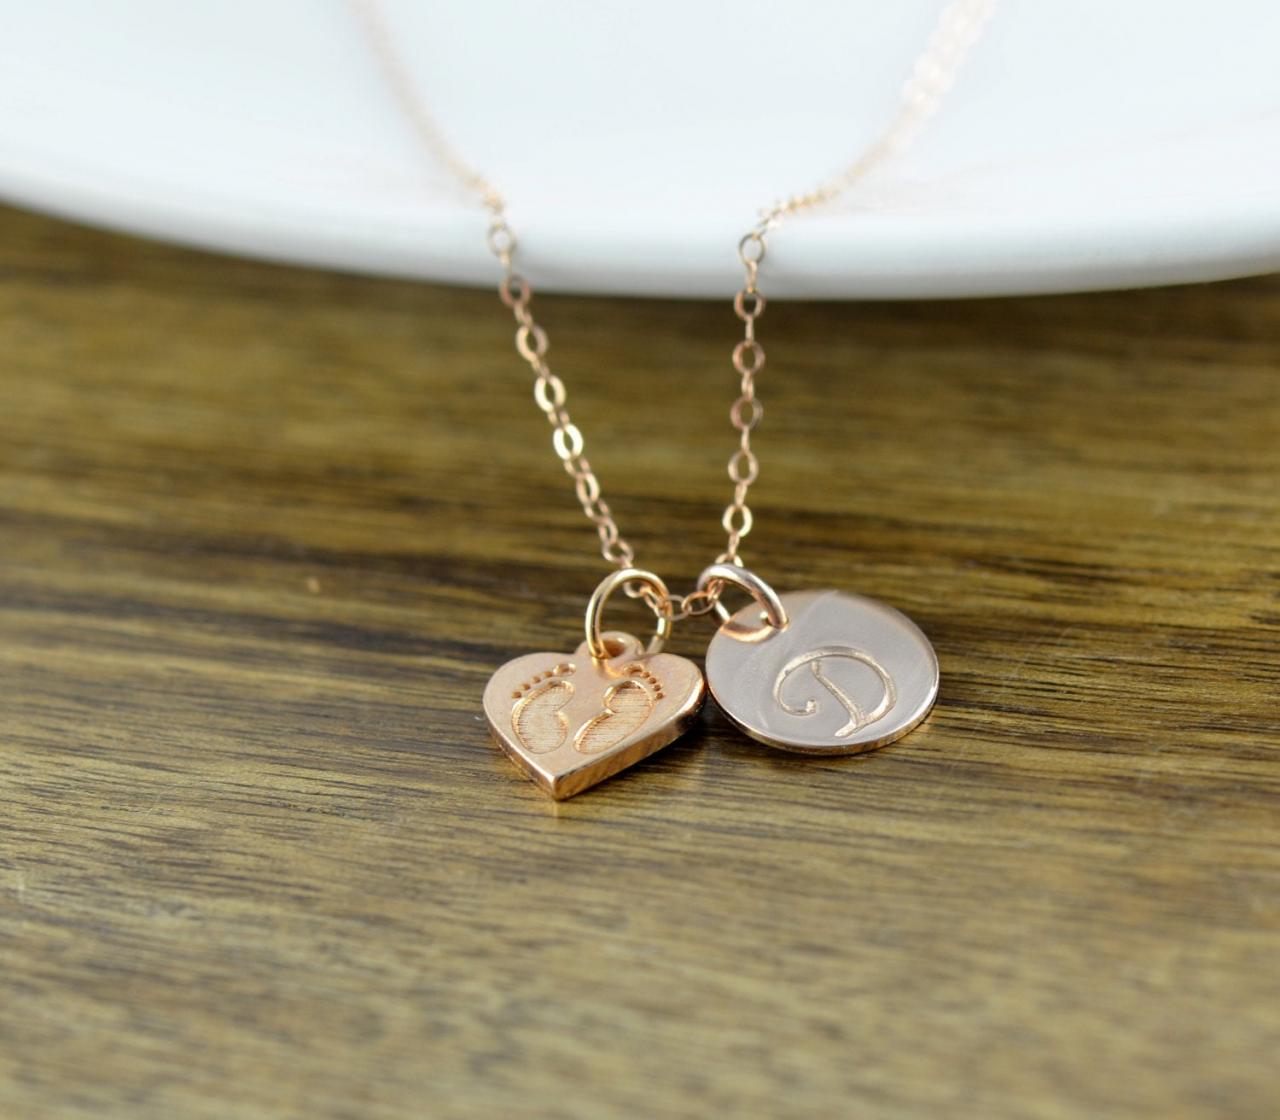 Rose Gold Necklace, Rose Gold Jewelry, New Mom Gift, New Baby Gift, Baby Feet Charm, Personalized Initial Necklace, Rose Gold Jewelry